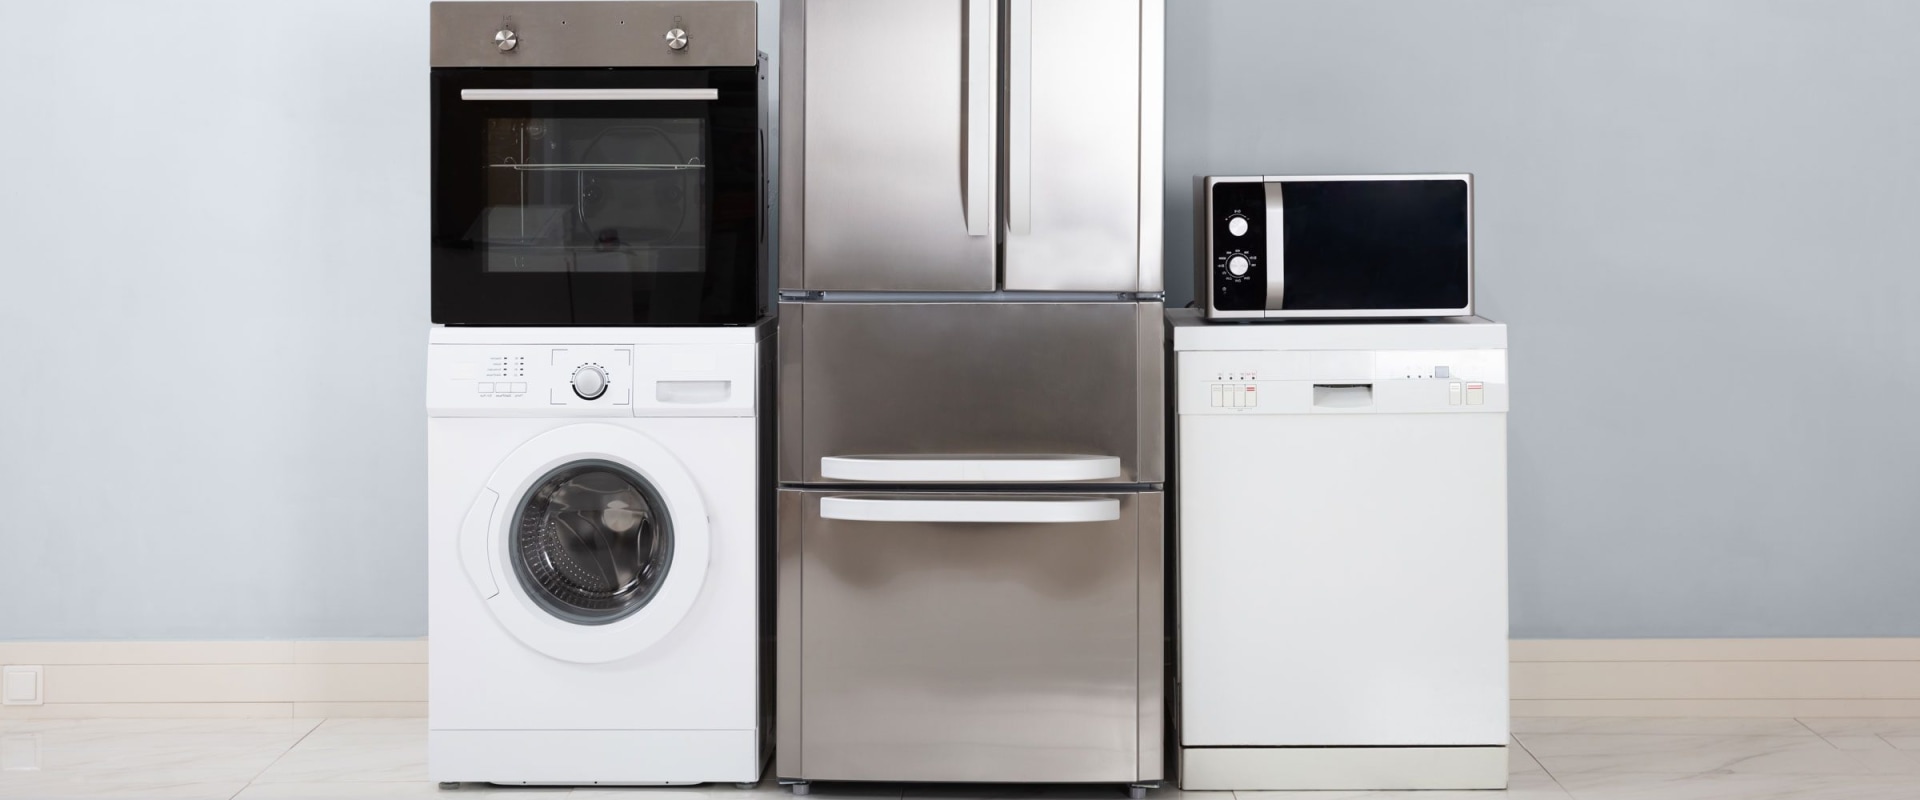 What is an example of a major appliance?